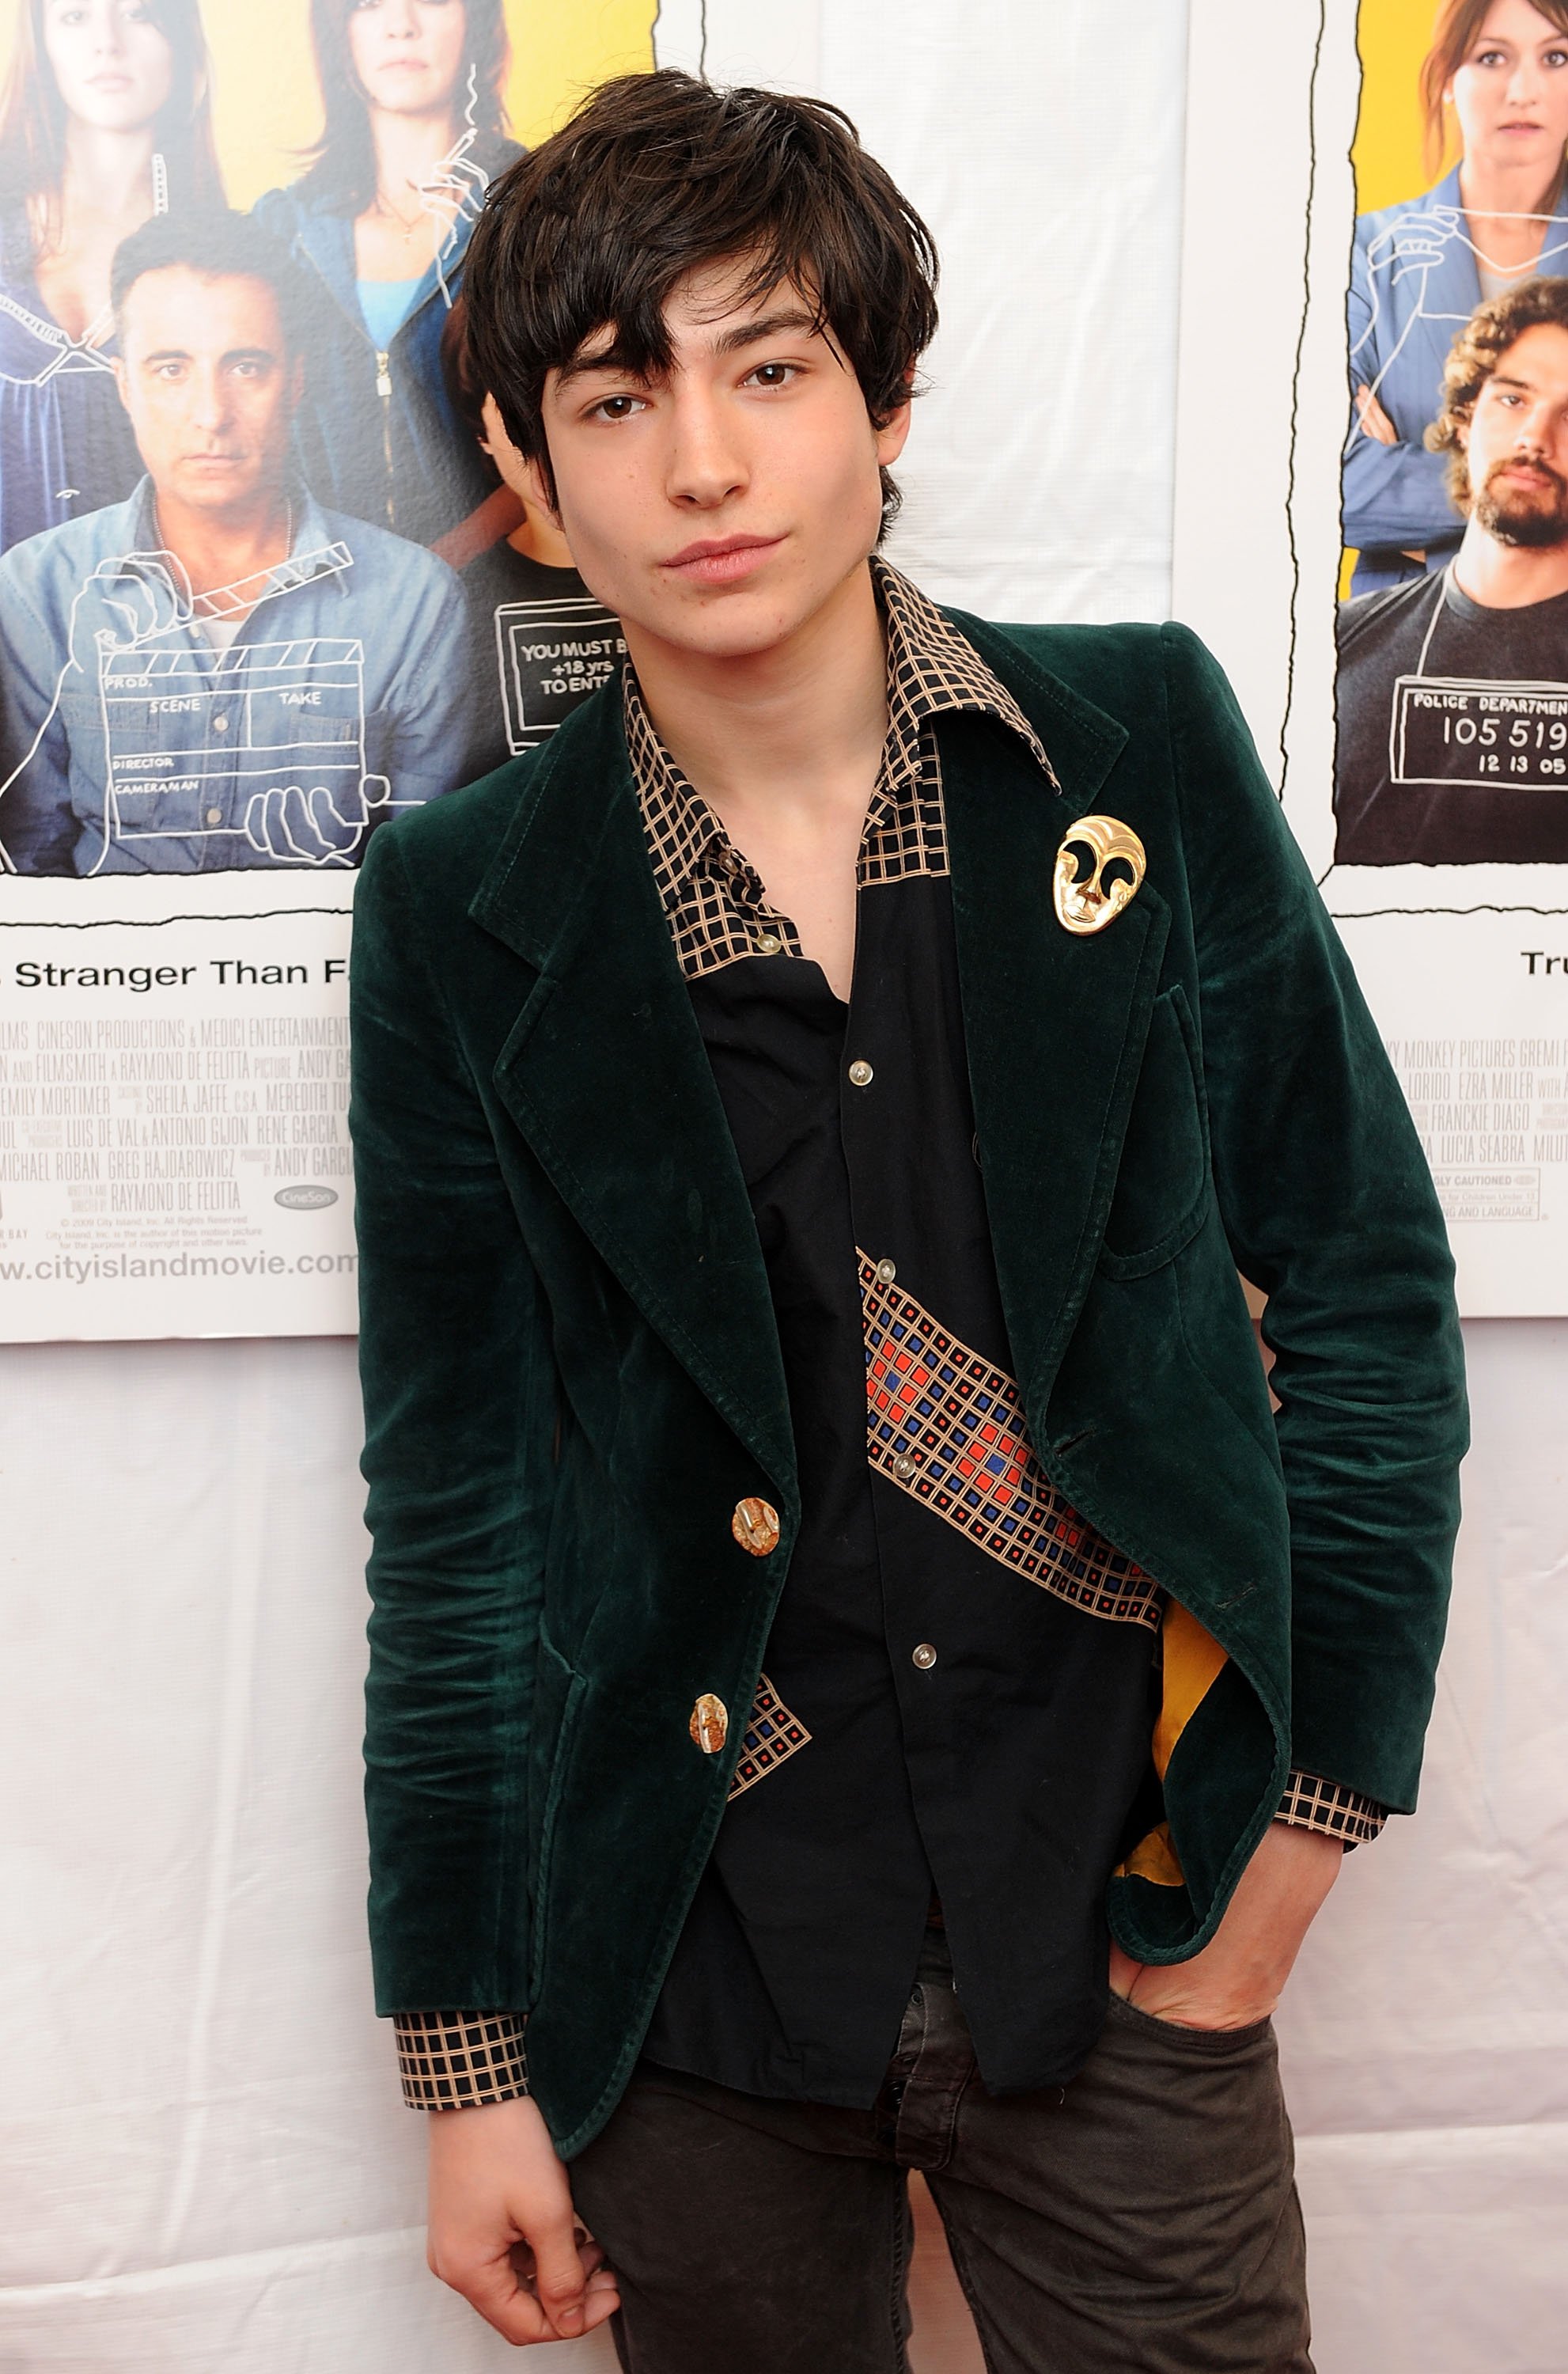 Ezra Miller at the premiere of "city ​​island" March 10, 2010 |  Source: Getty Images